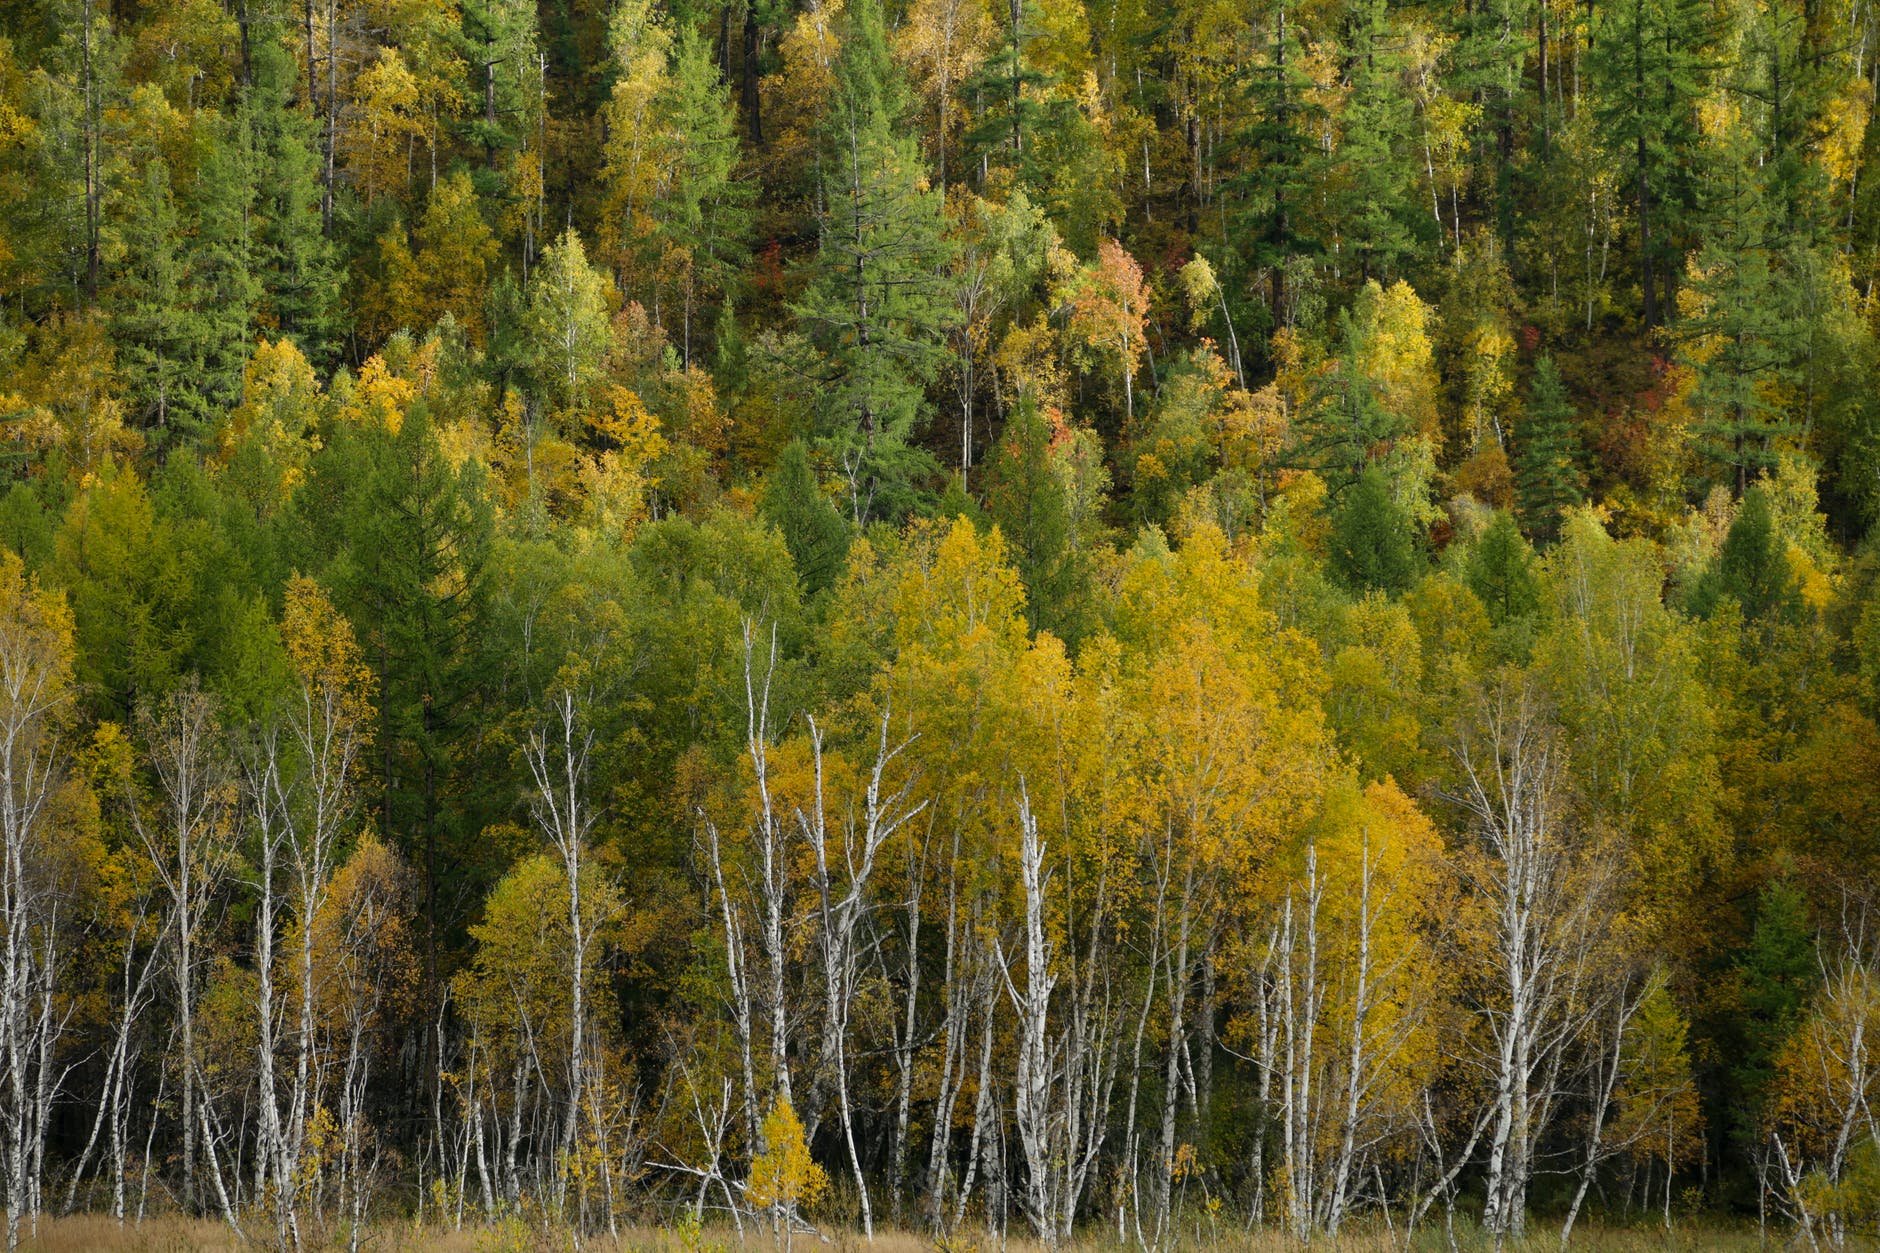 green and yellow trees in a forest